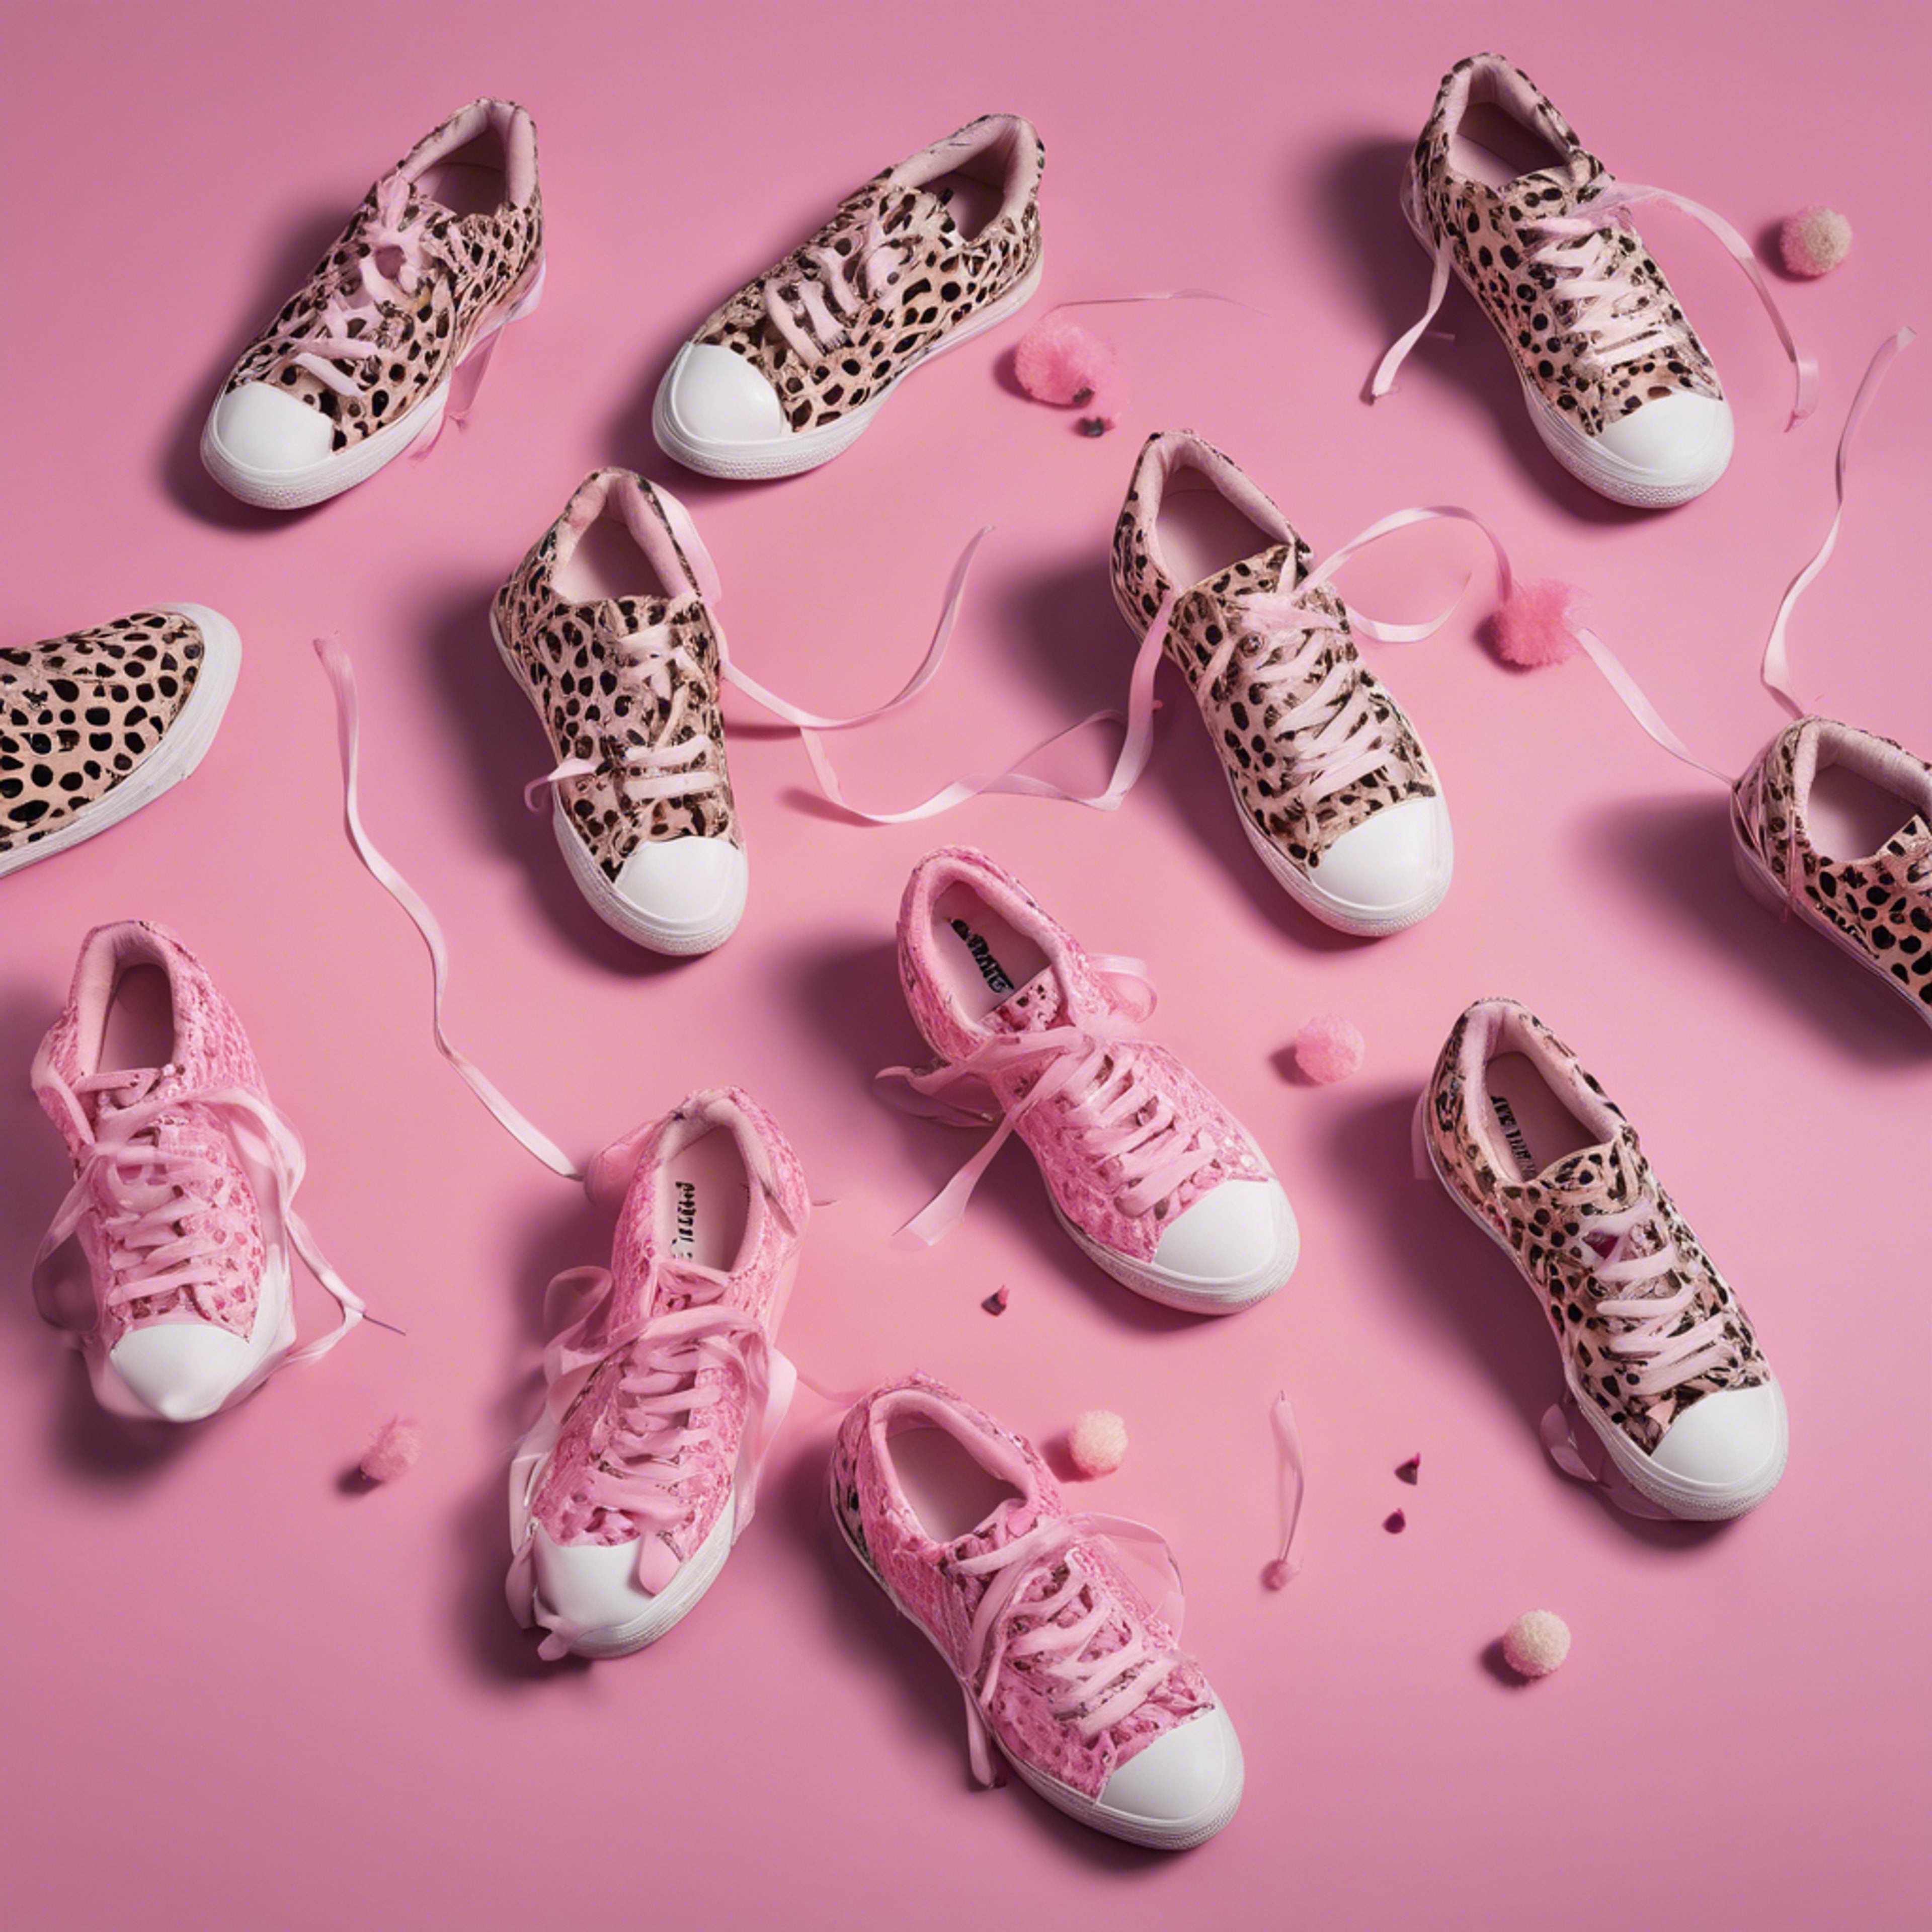 An aerial view of a pair of tennis shoes with a girly pink cheetah pattern. Валлпапер[69b37b649749417cbf35]